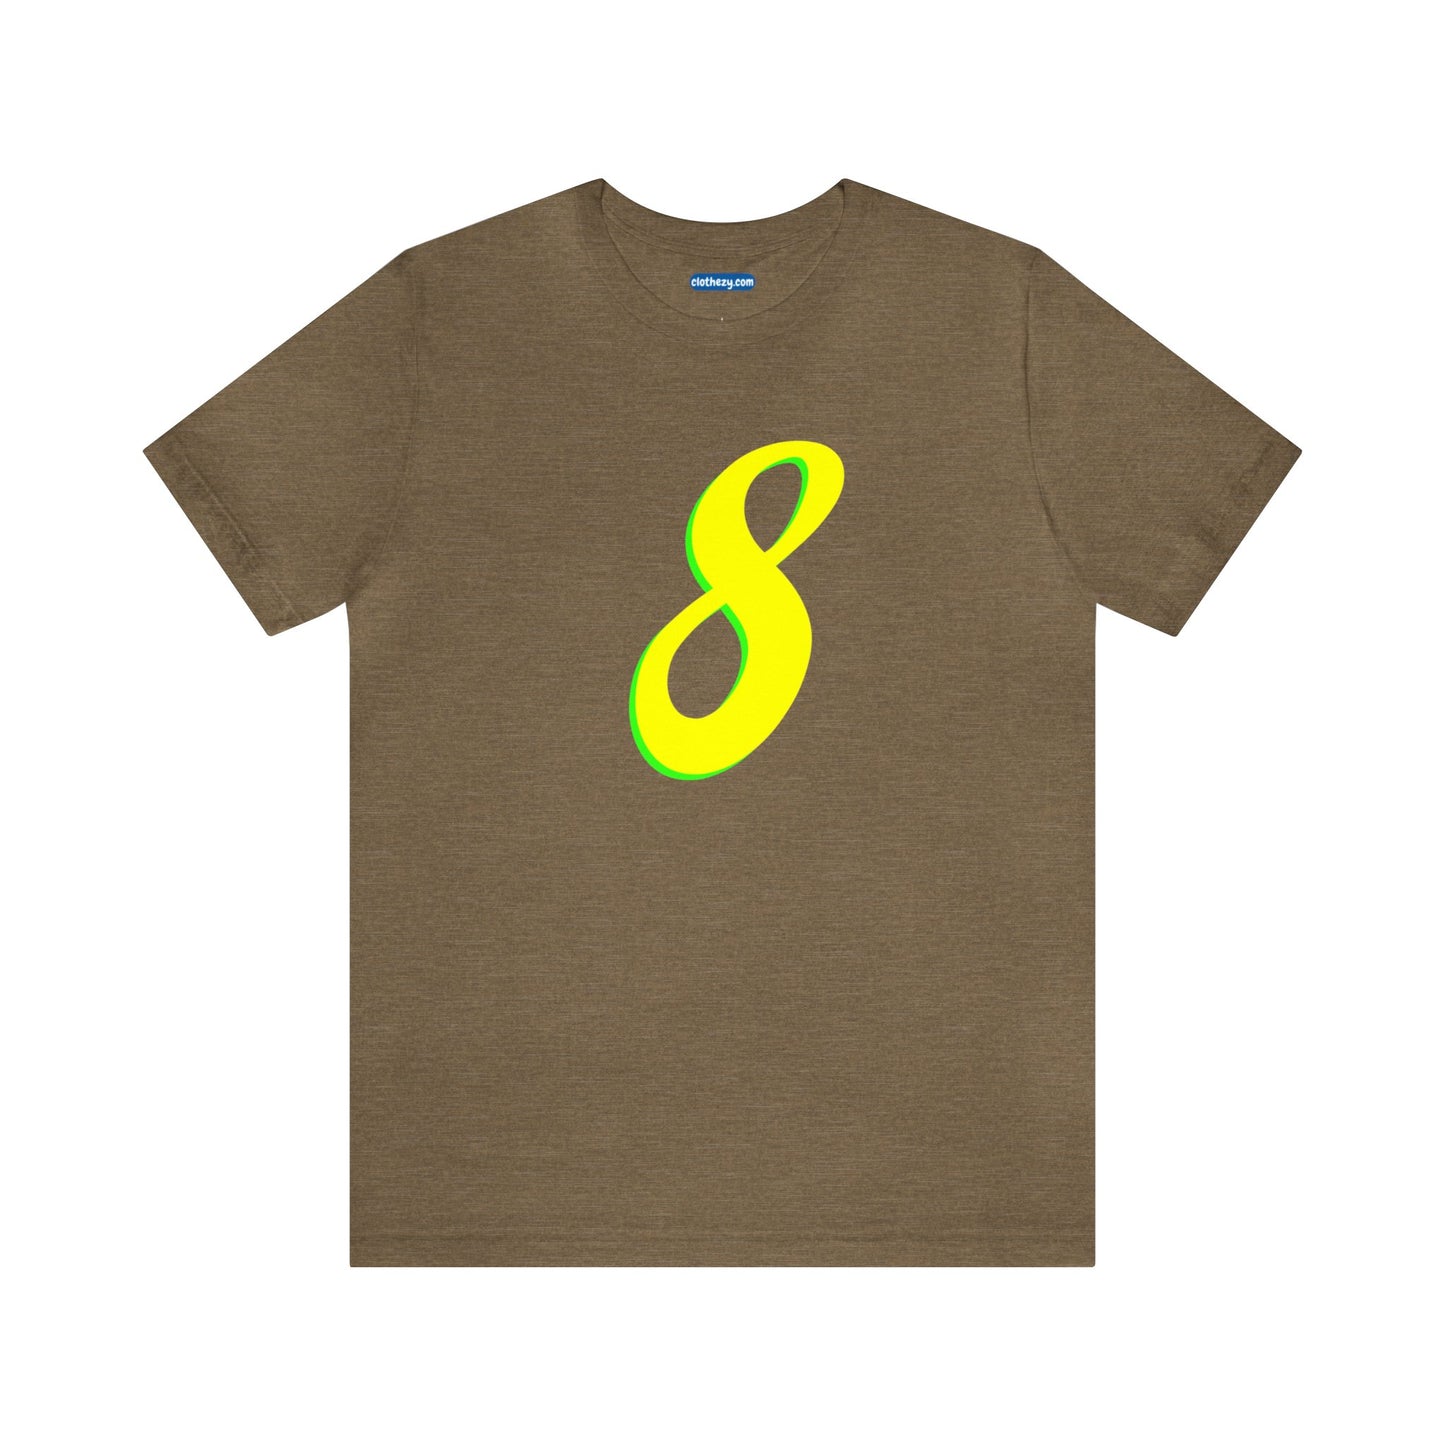 Number 8 Design - Soft Cotton Tee for birthdays and celebrations, Gift for friends and family, Multiple Options by clothezy.com in Olive Heather Size Small - Buy Now